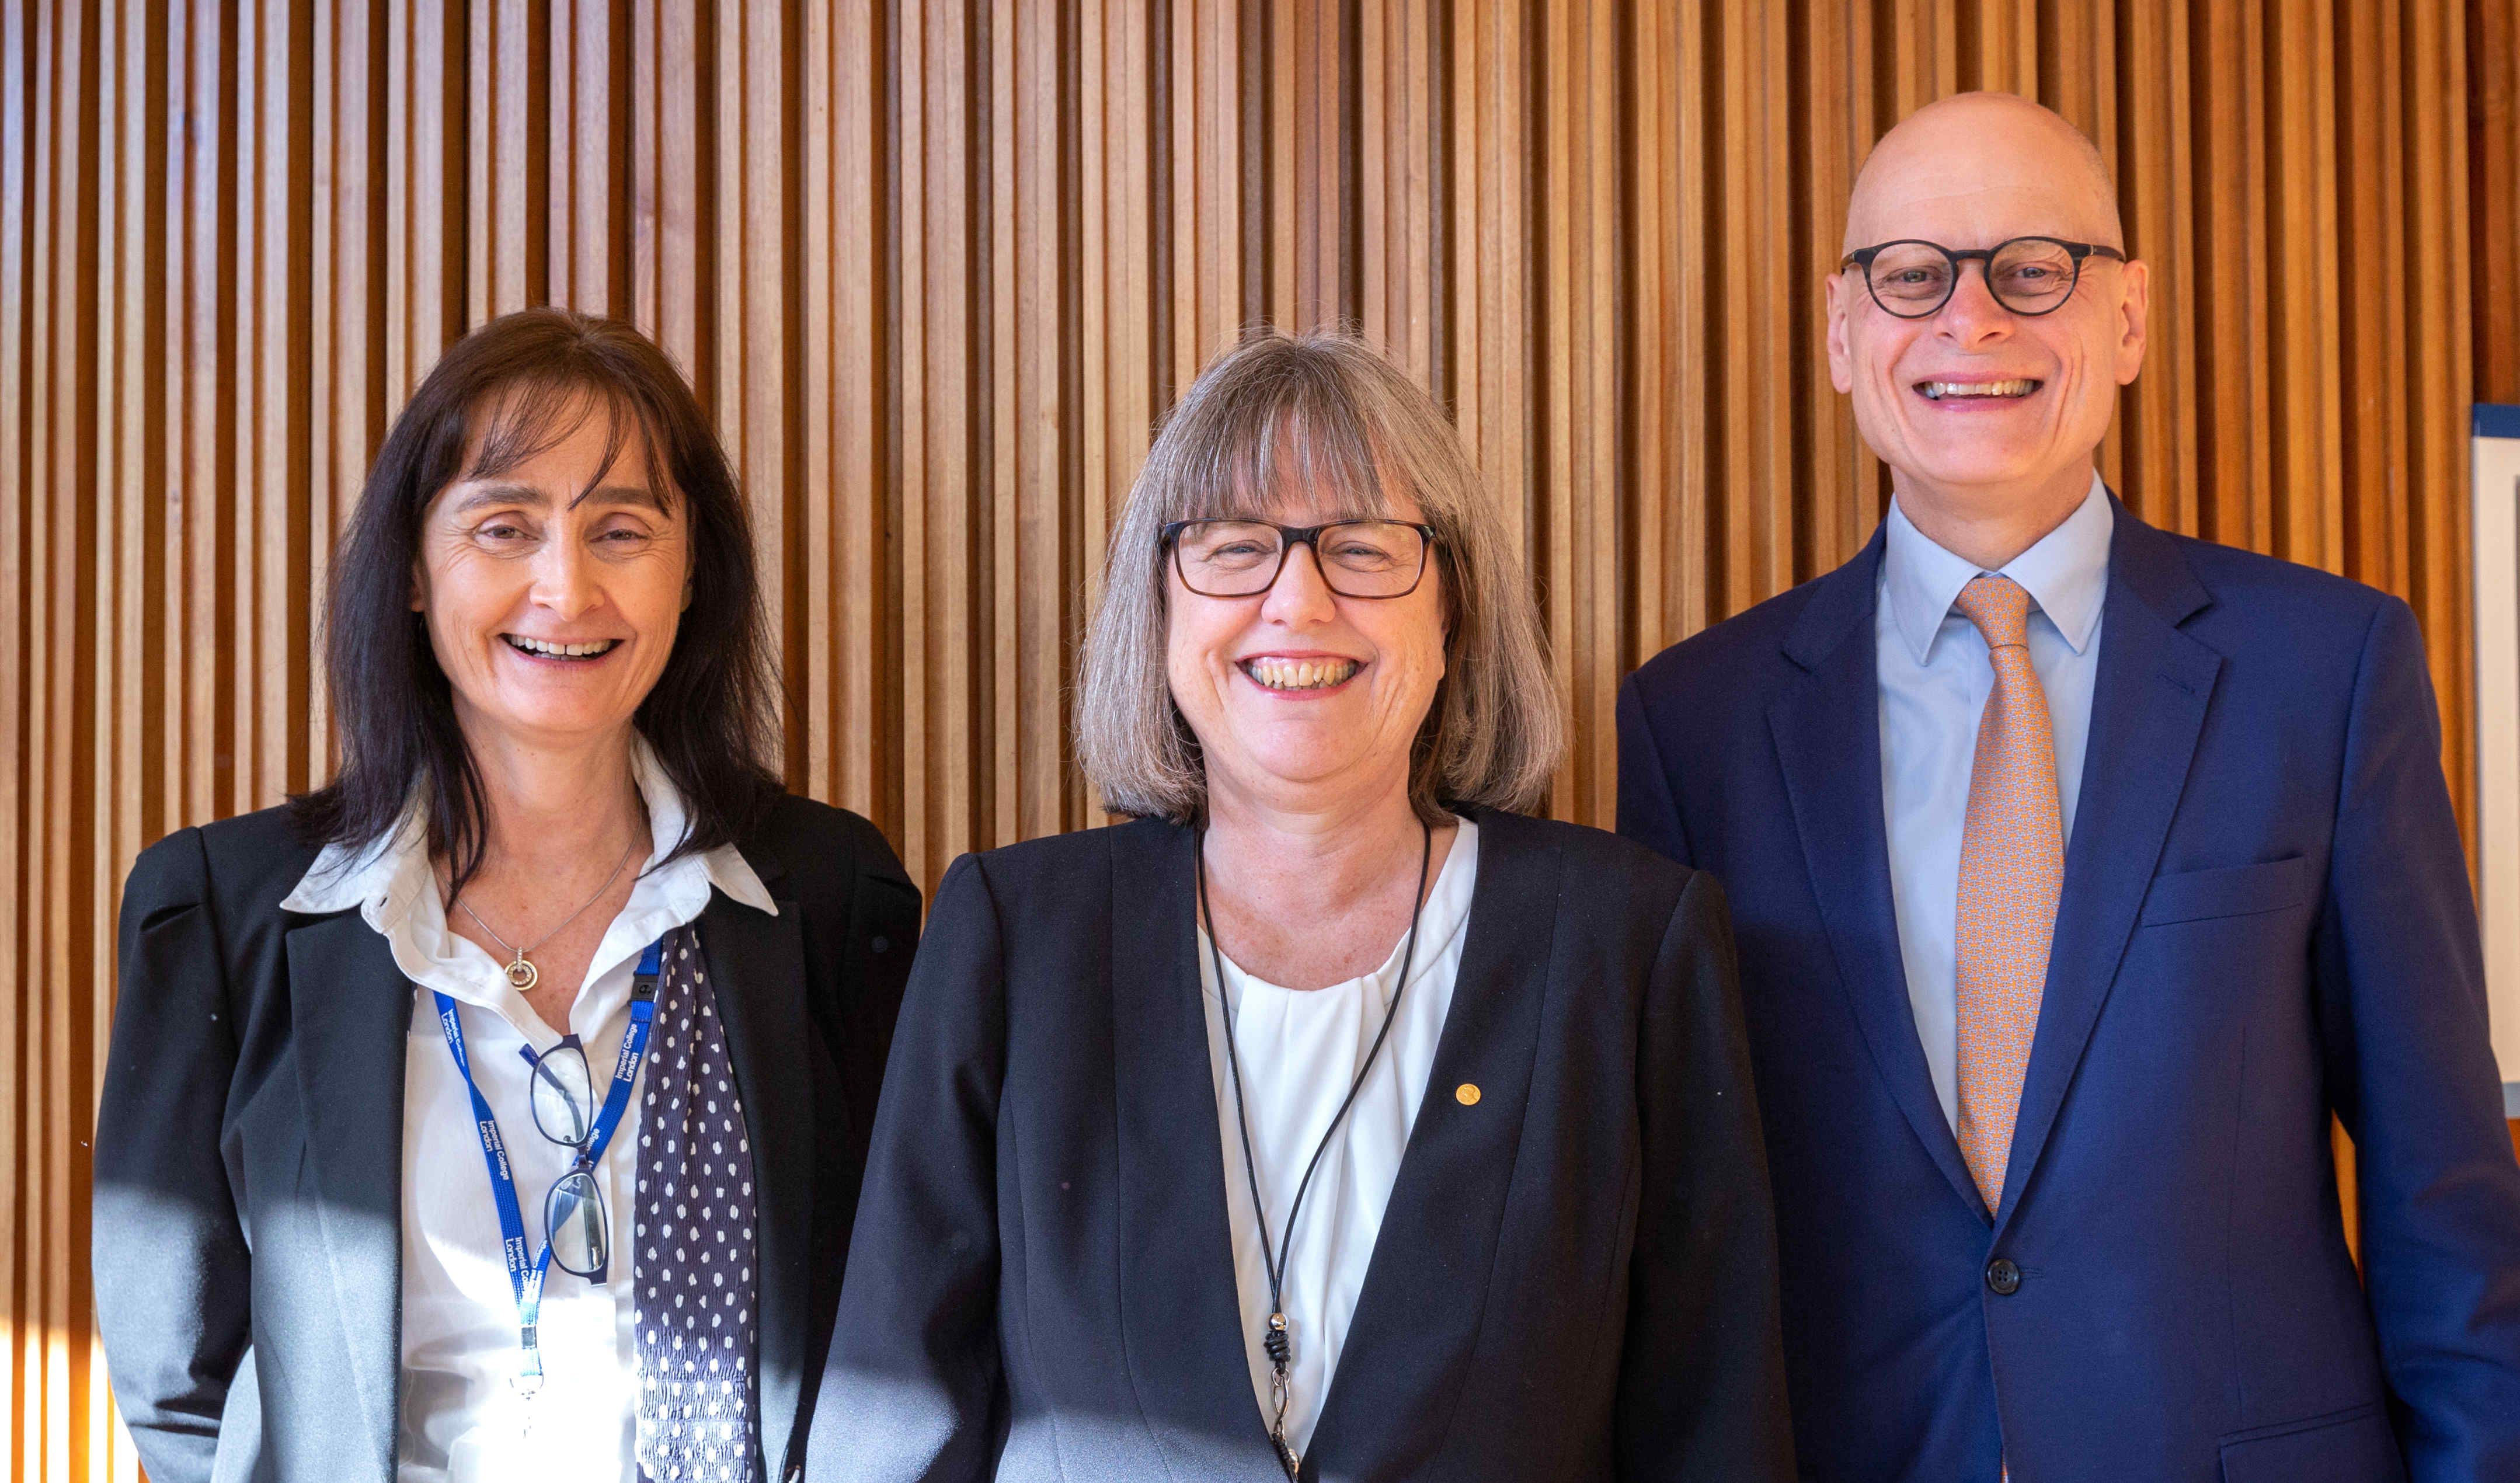 Prof Ian Walmsley with Prof Michele Dougherty and Prof Donna Strickland